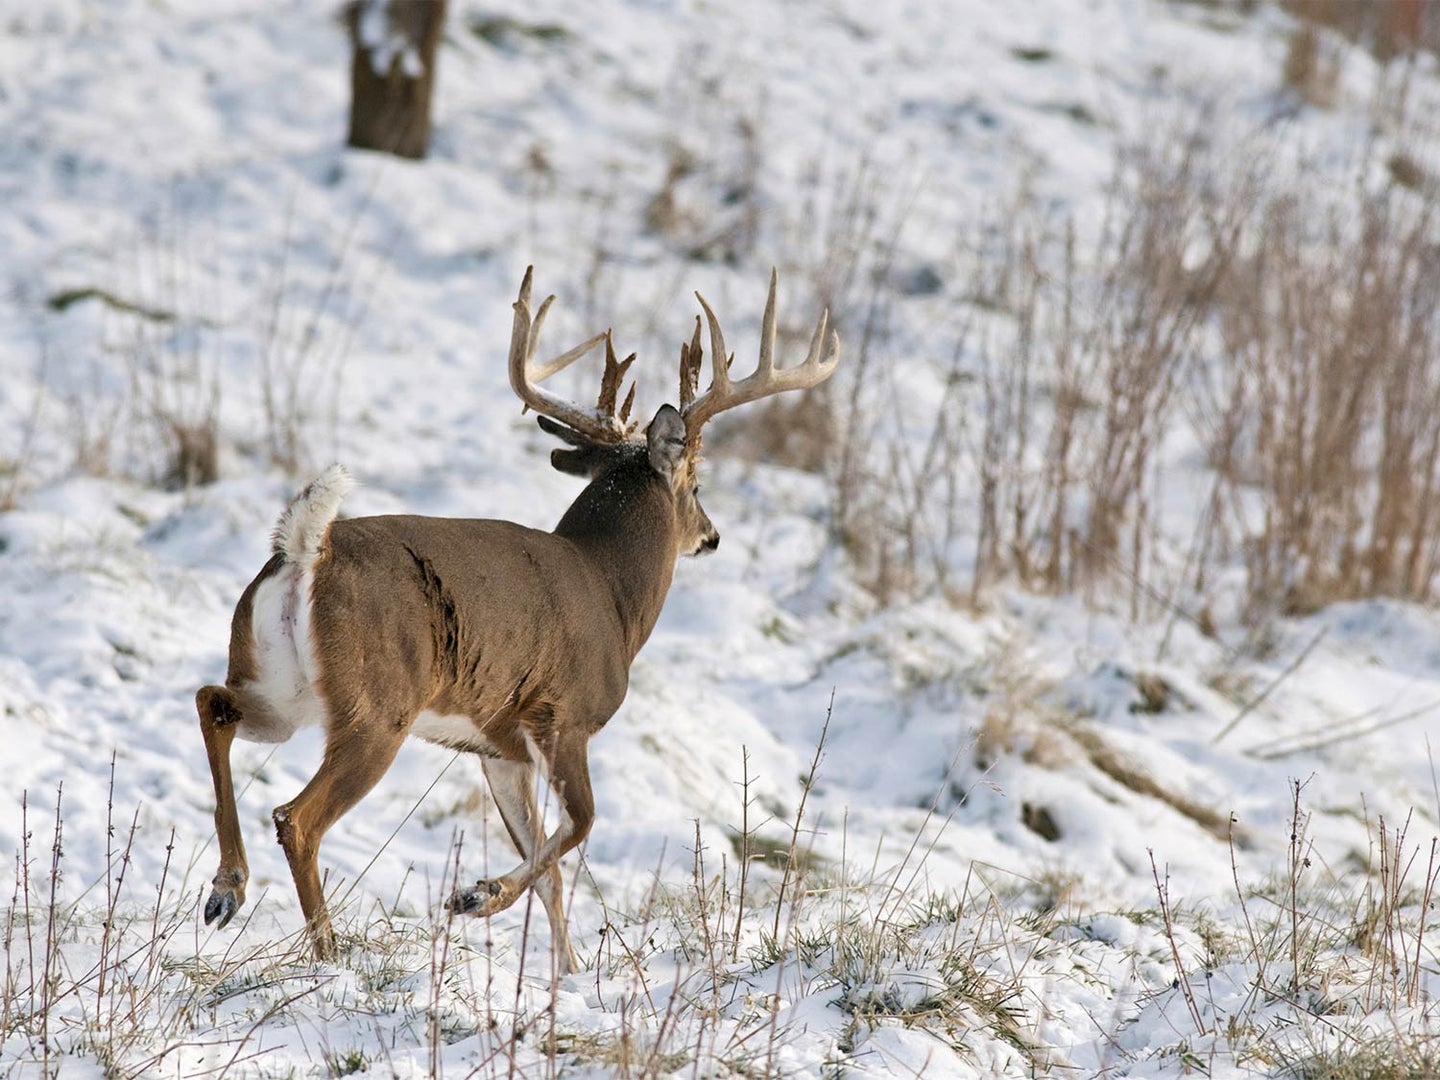 A large whitetail buck running through a snow-covered field.